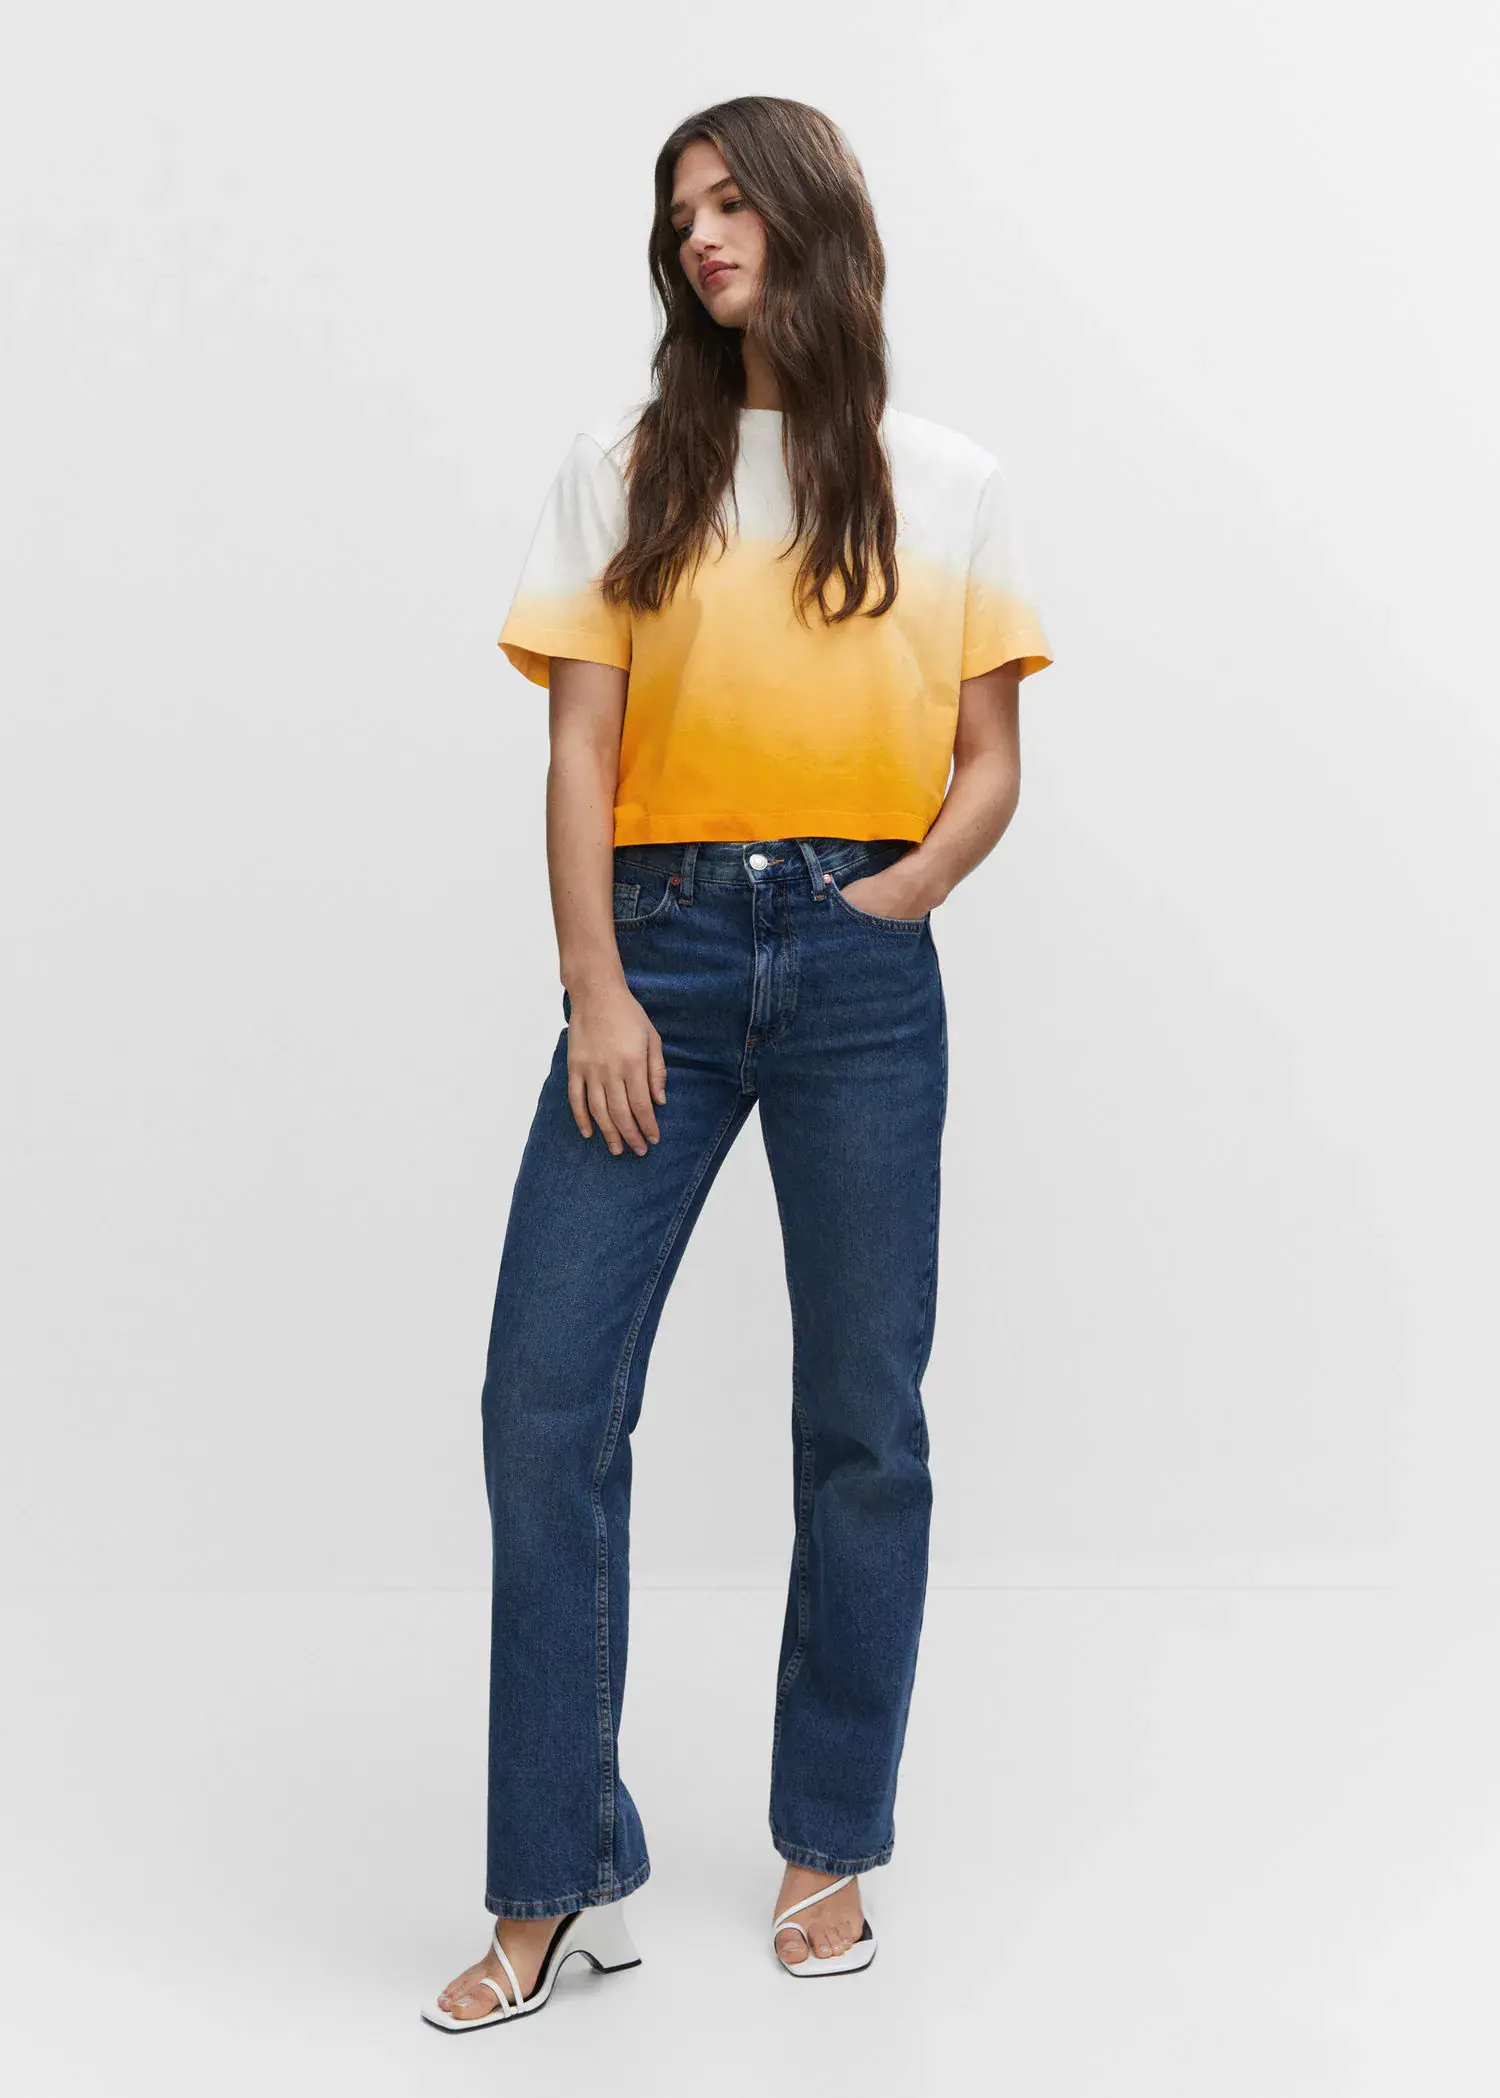 Mango Cotton ombré t-shirt. a woman in a yellow and white shirt and blue jeans. 